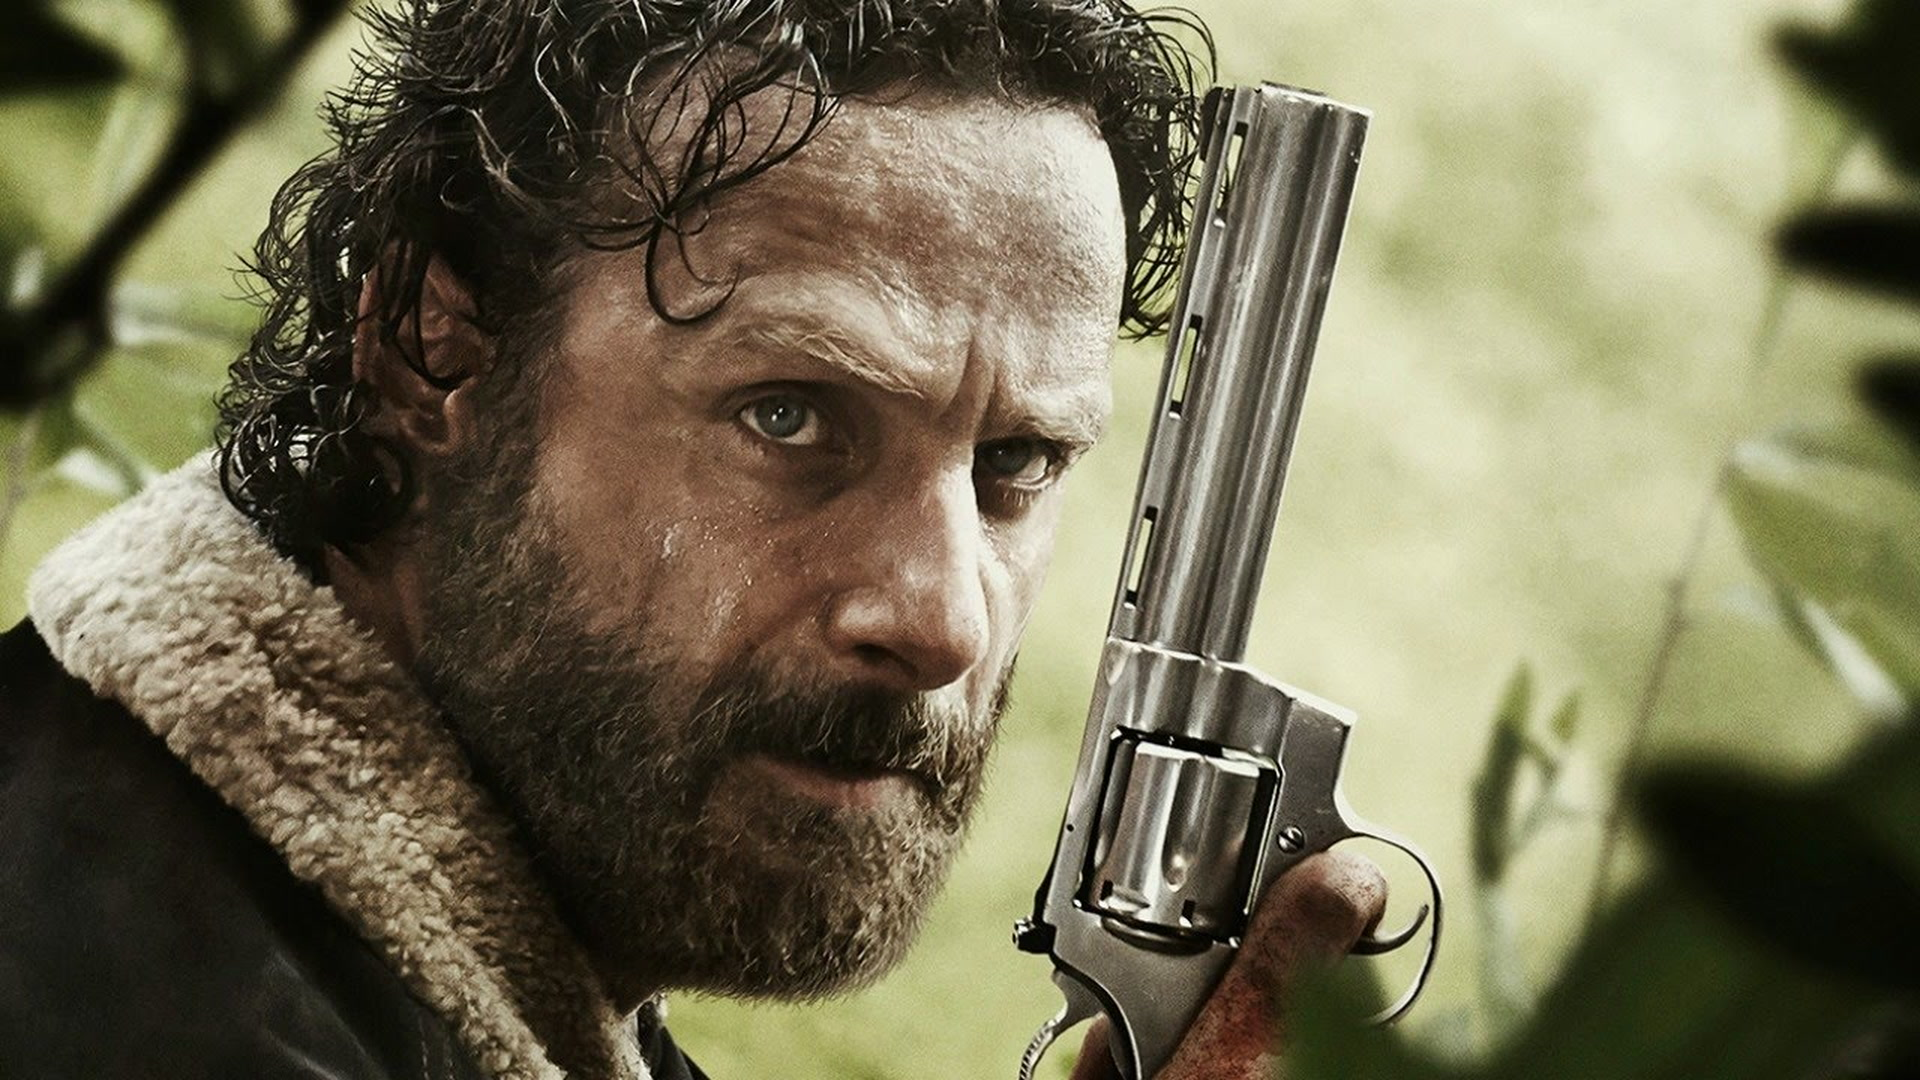 The Walking Dead: Rick Grimes And Michonne Set To Return To Combat Wicked Zombies - The Illuminerdi